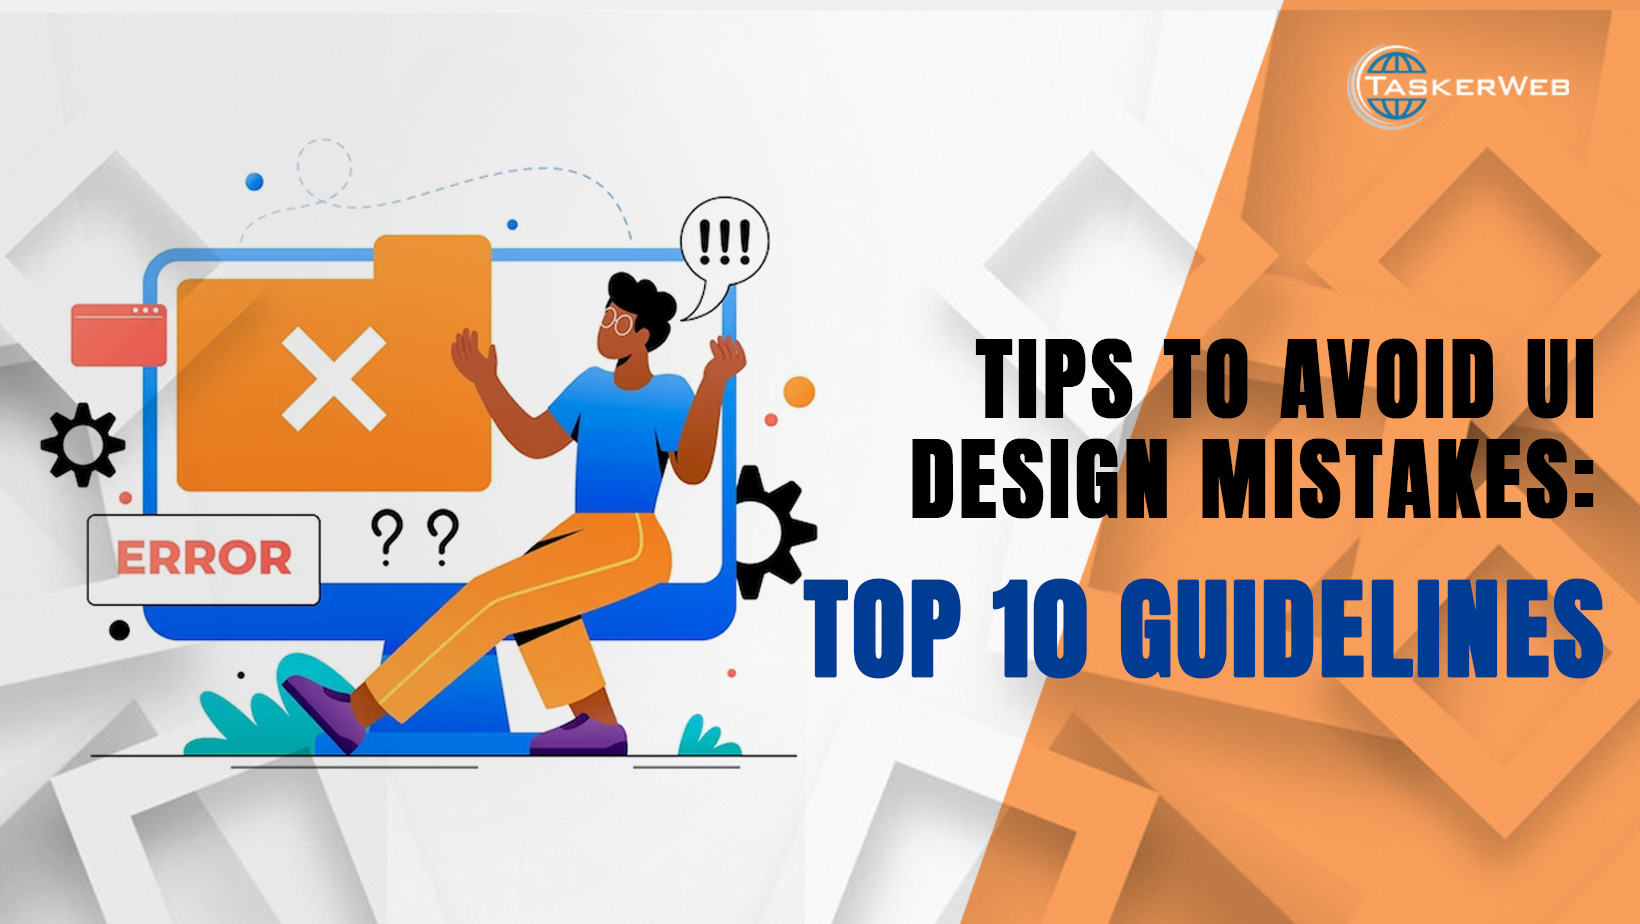 Tips To Avoid UI Design Mistakes: Top 10 Guidelines